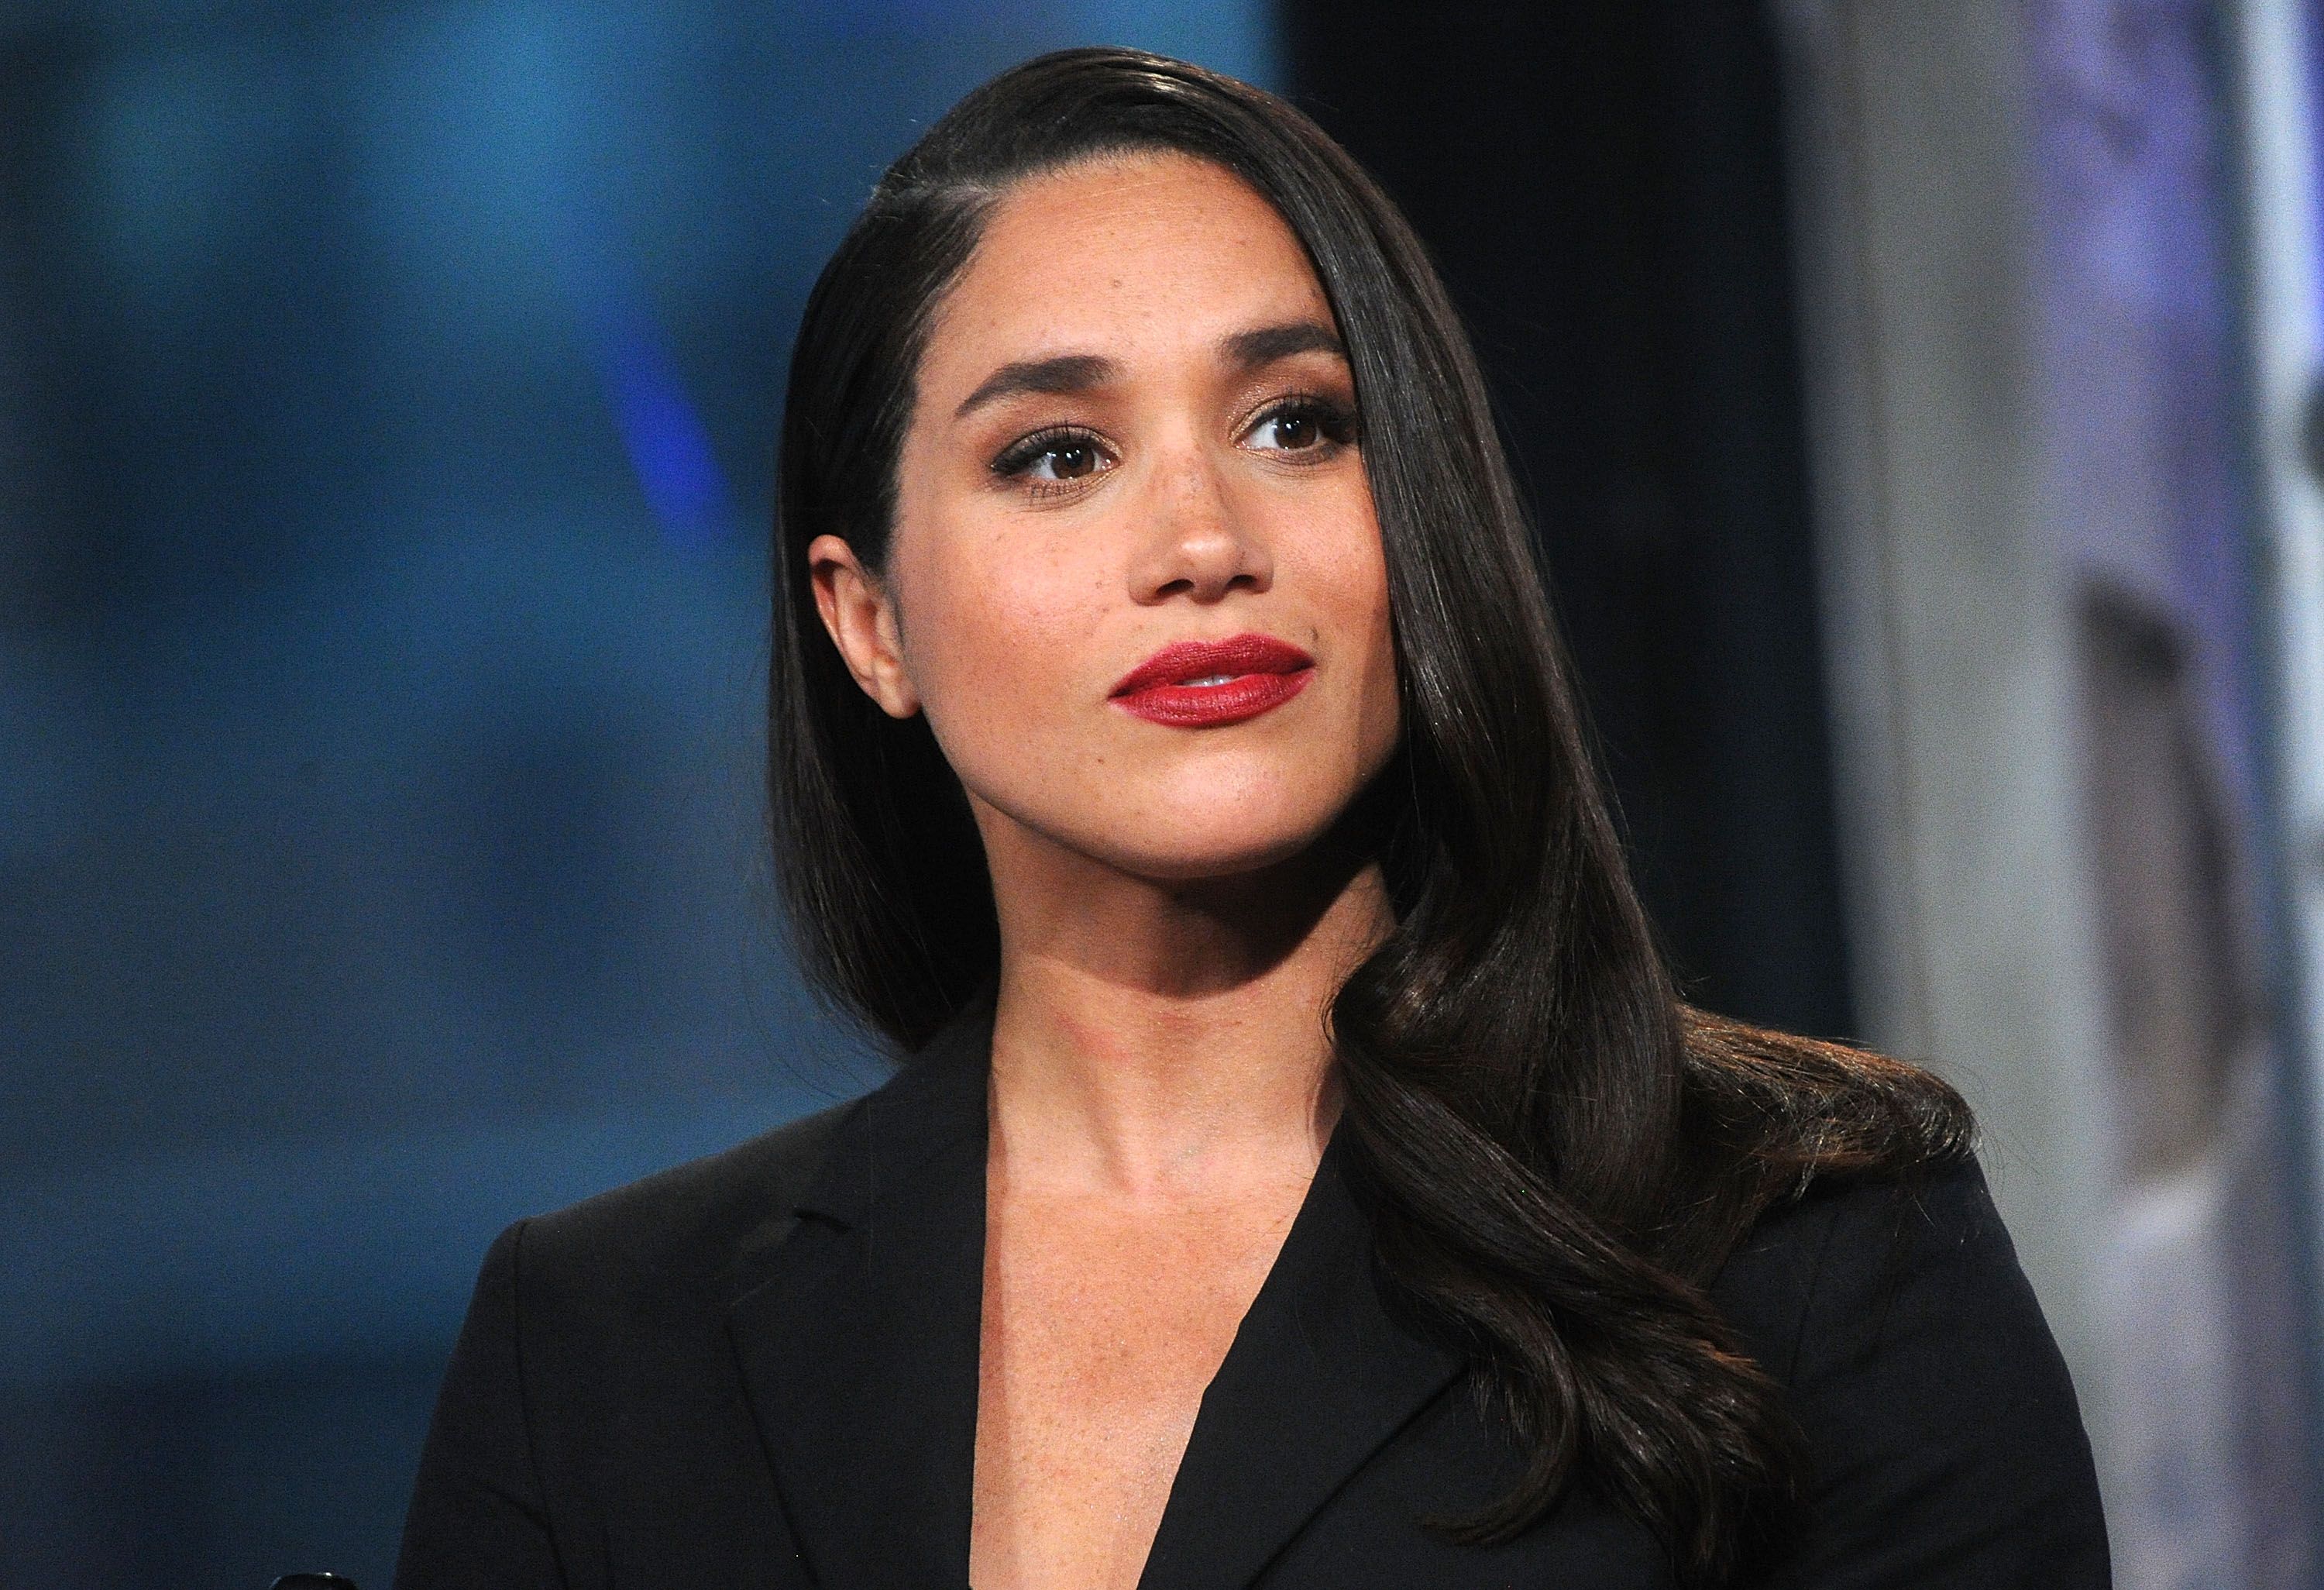 Meghan Markle during the AOL Build Presents "Suits" at AOL Studios In New York on March 17, 2016 in New York City. | Source: Getty Images